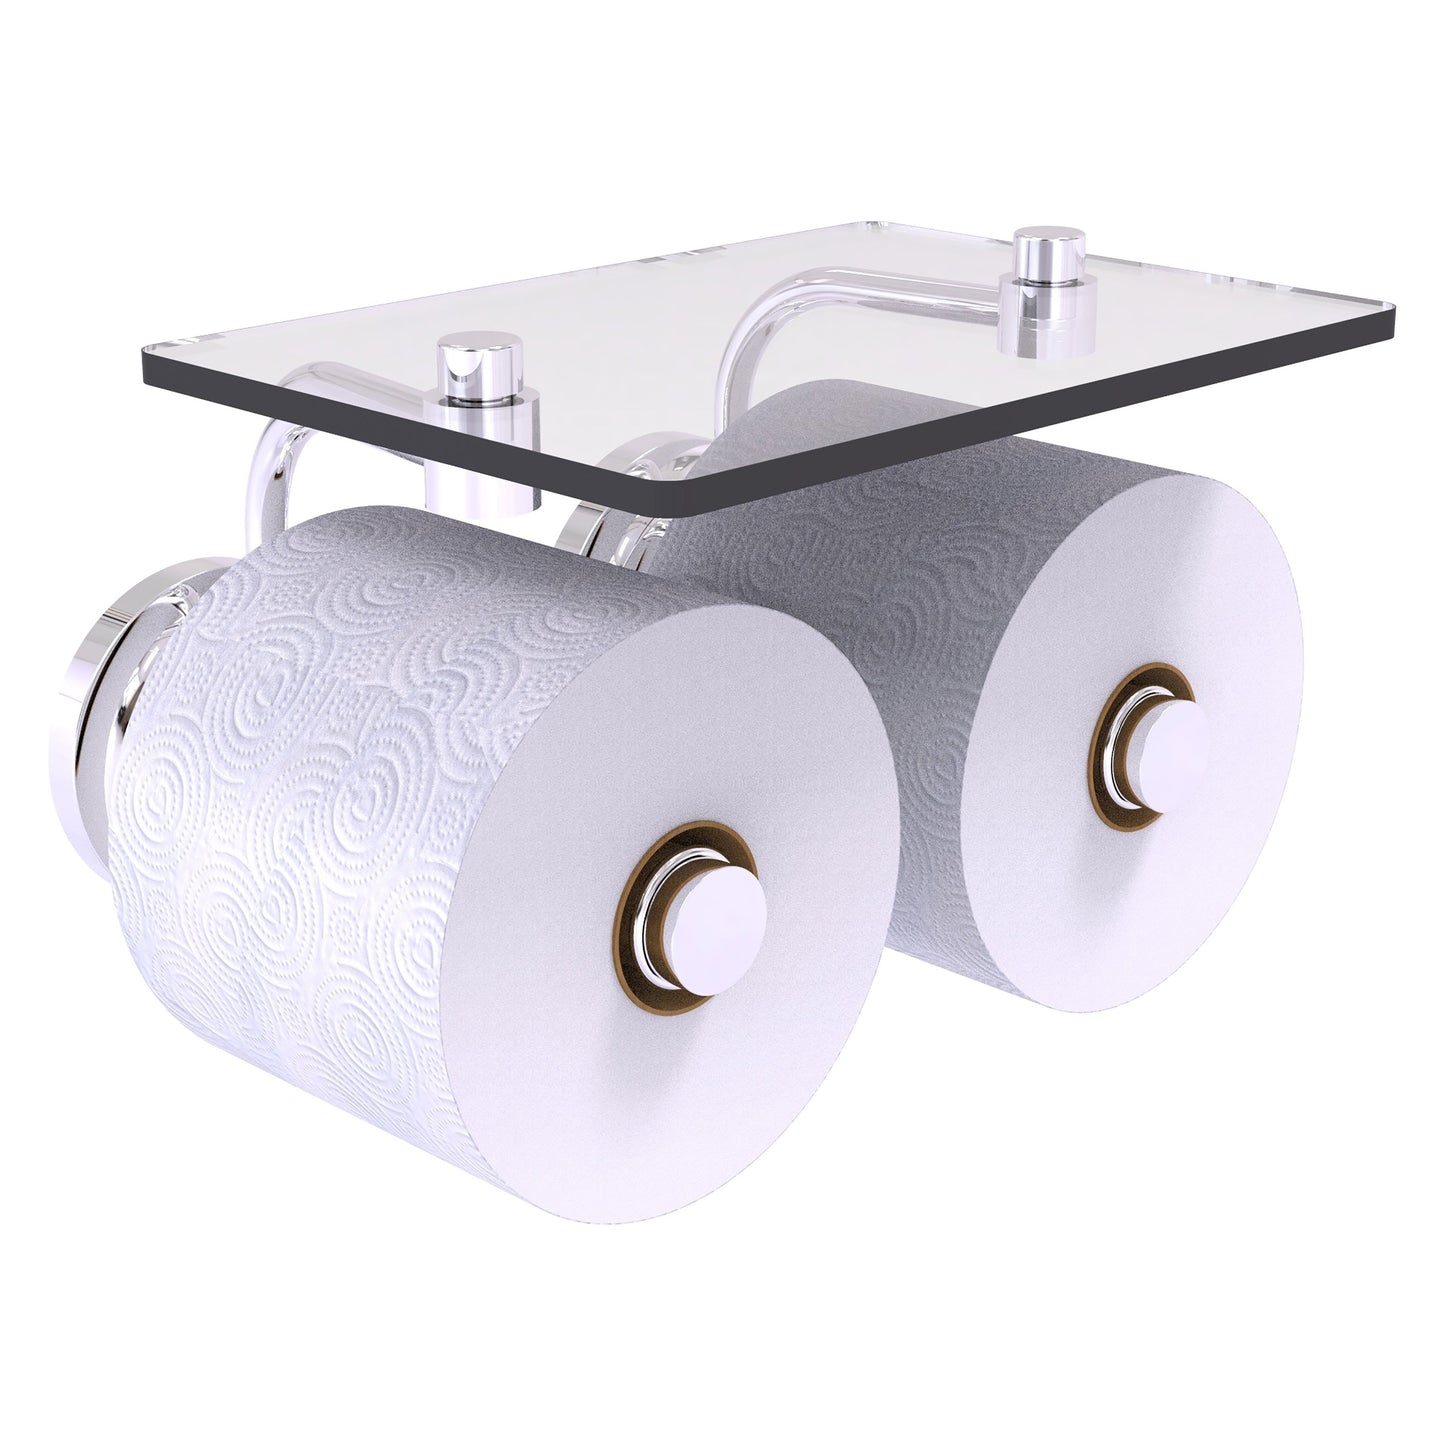 Allied Brass Que New 8.5" x 7.4" Polished Chrome Solid Brass 2-Roll Toilet Paper Holder With Glass Shelf